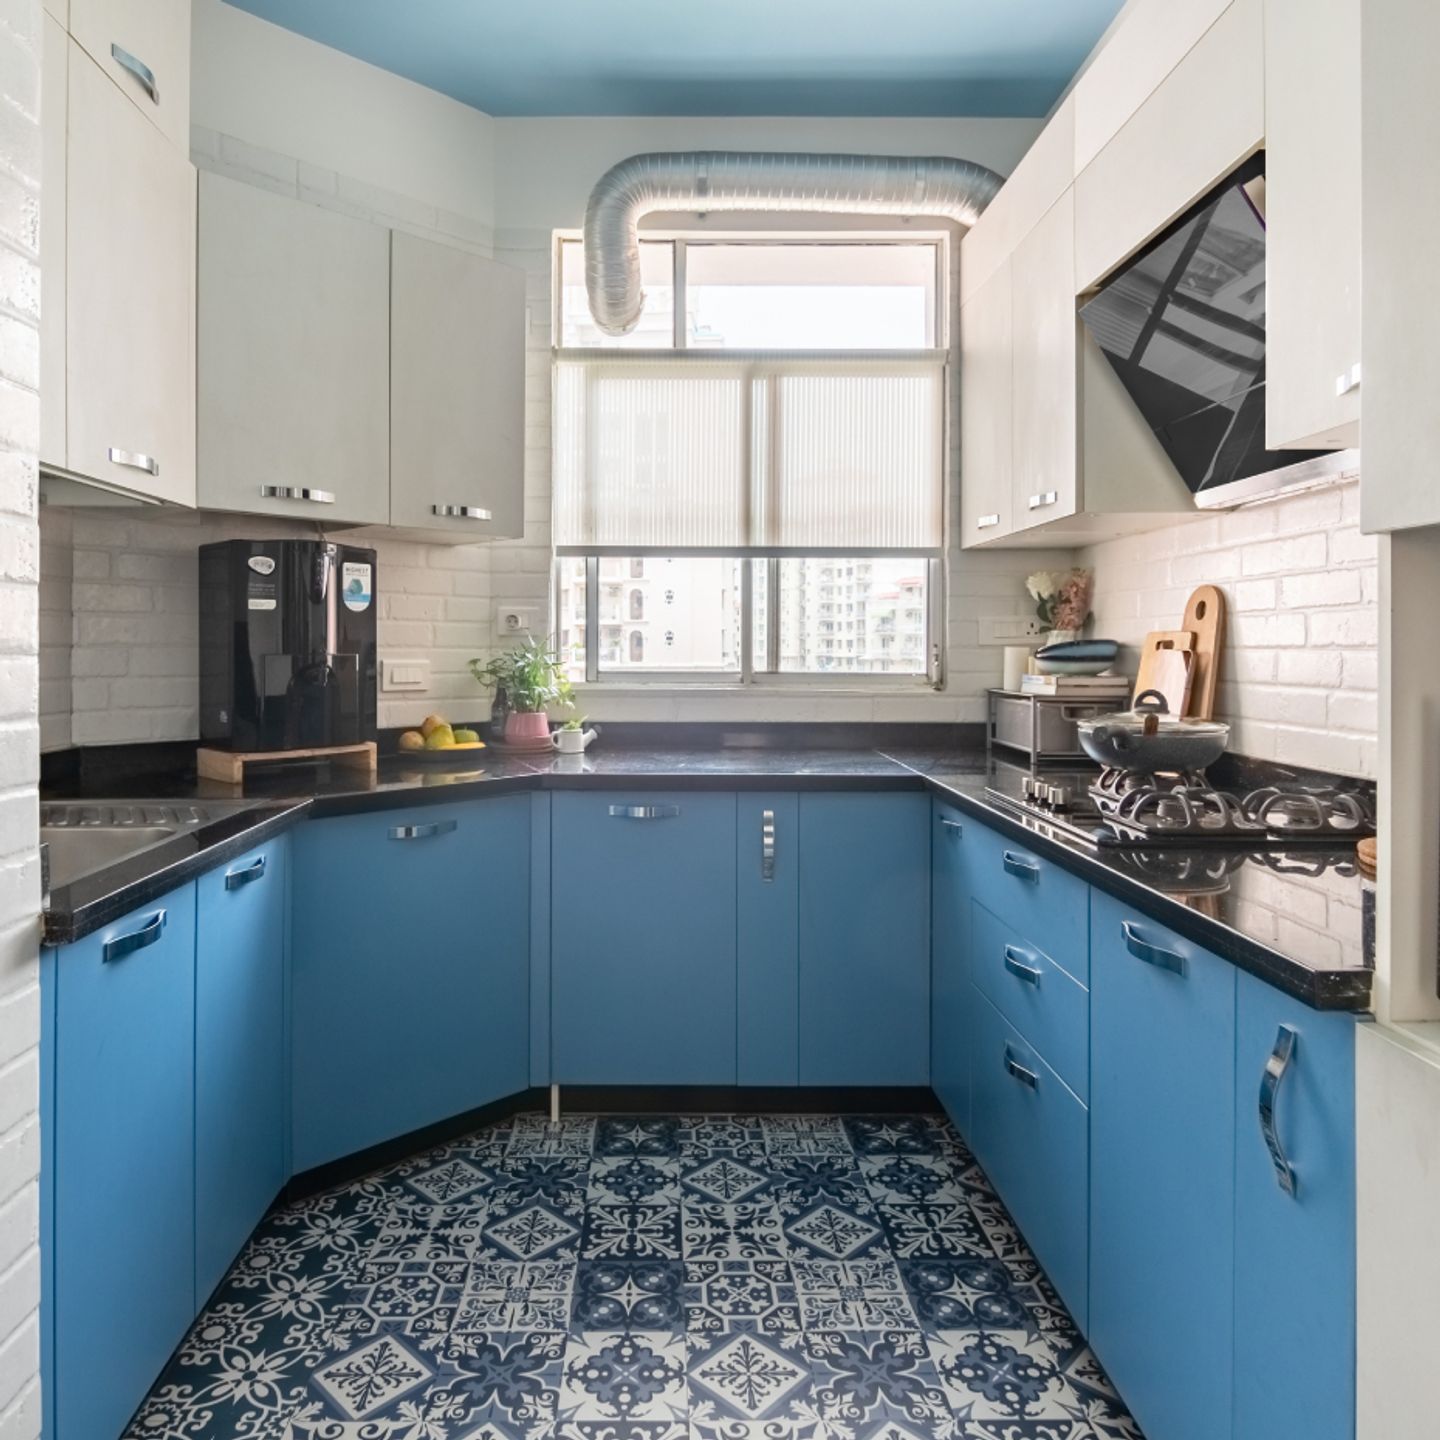 Glossy Floor Tiles Design In Shades Of Blue